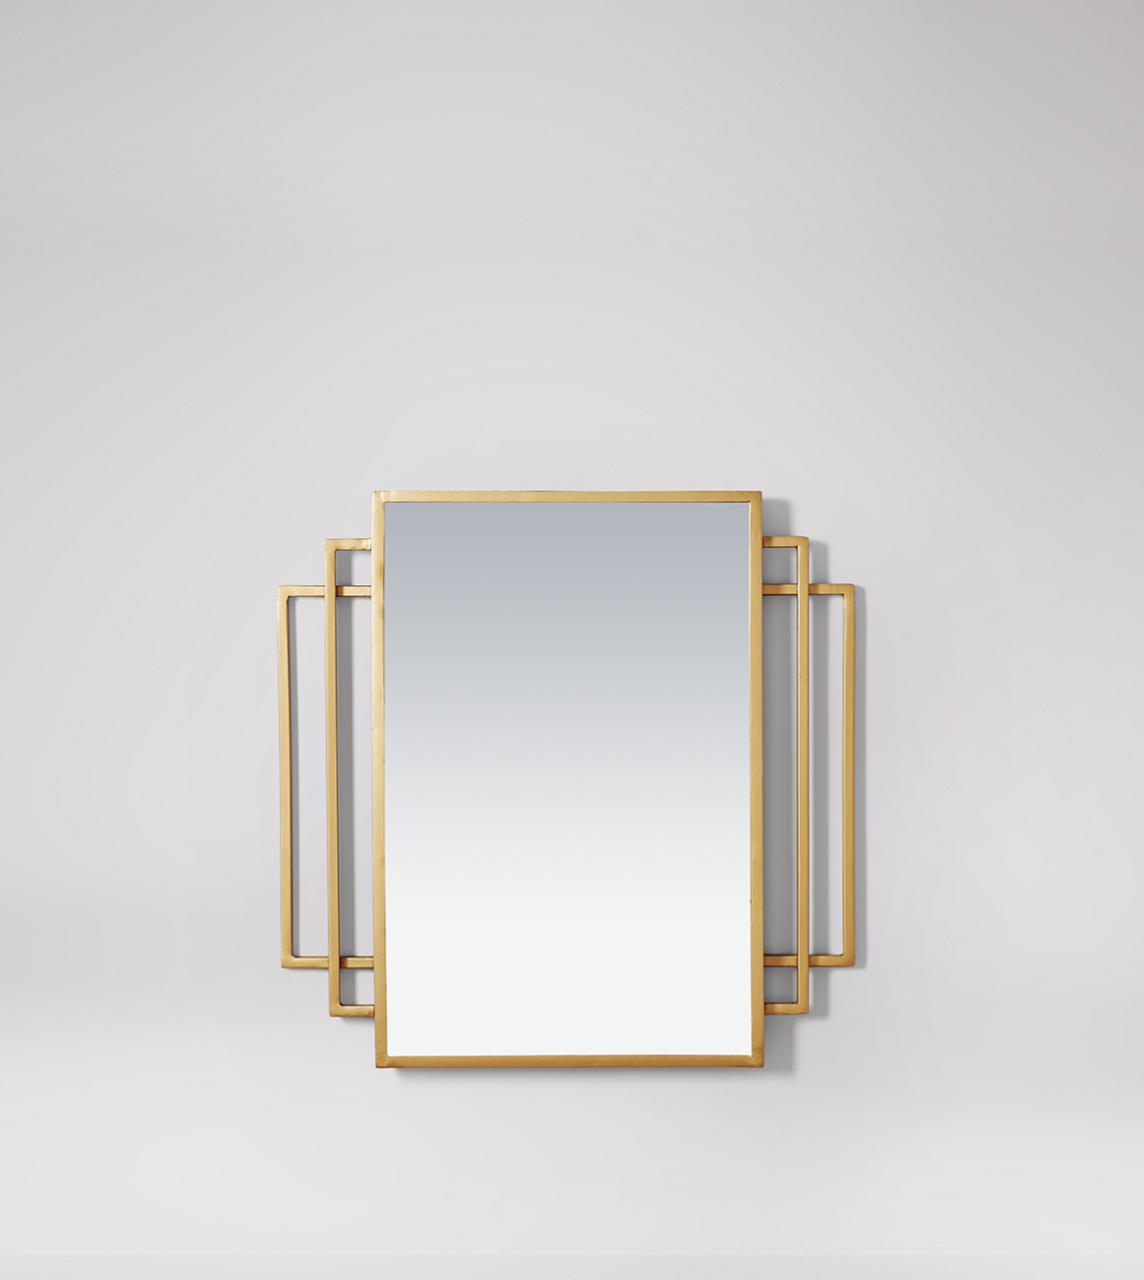 Claddagh Mirror, Art-Deco Style In Brass-Plated Steel | Swoon